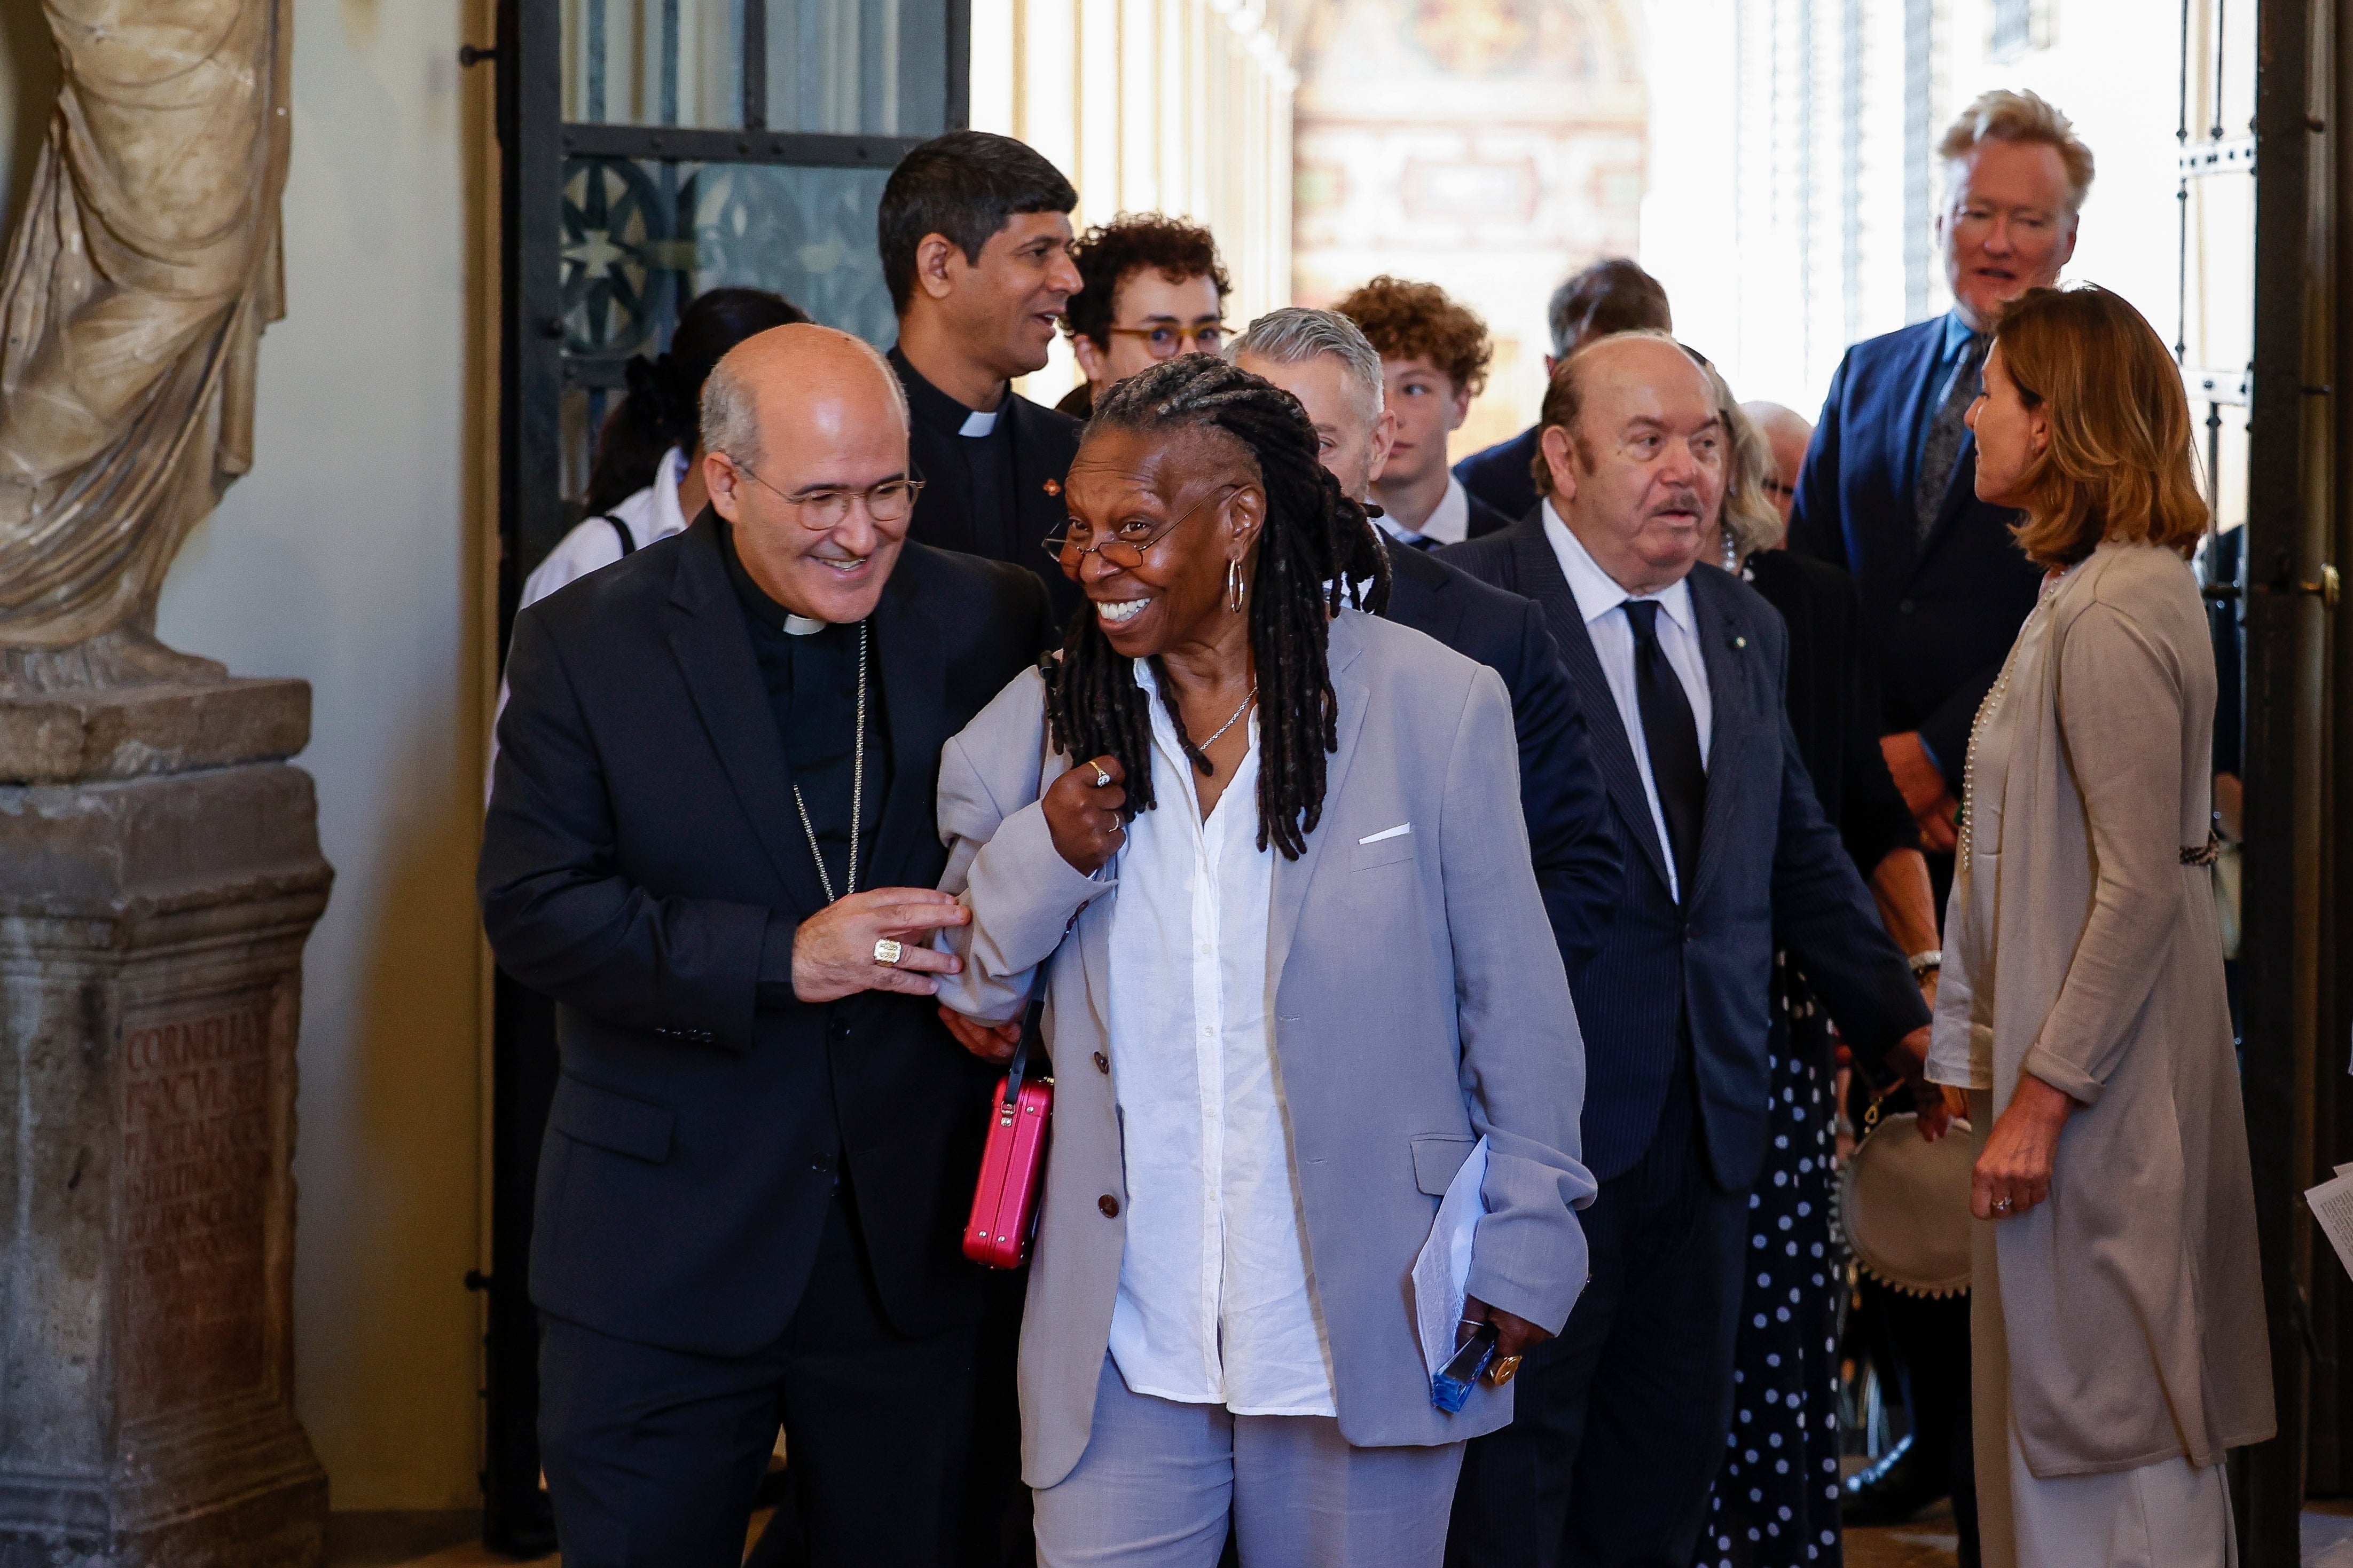 Whoopi Goldberg leaves after an audience with the Pope